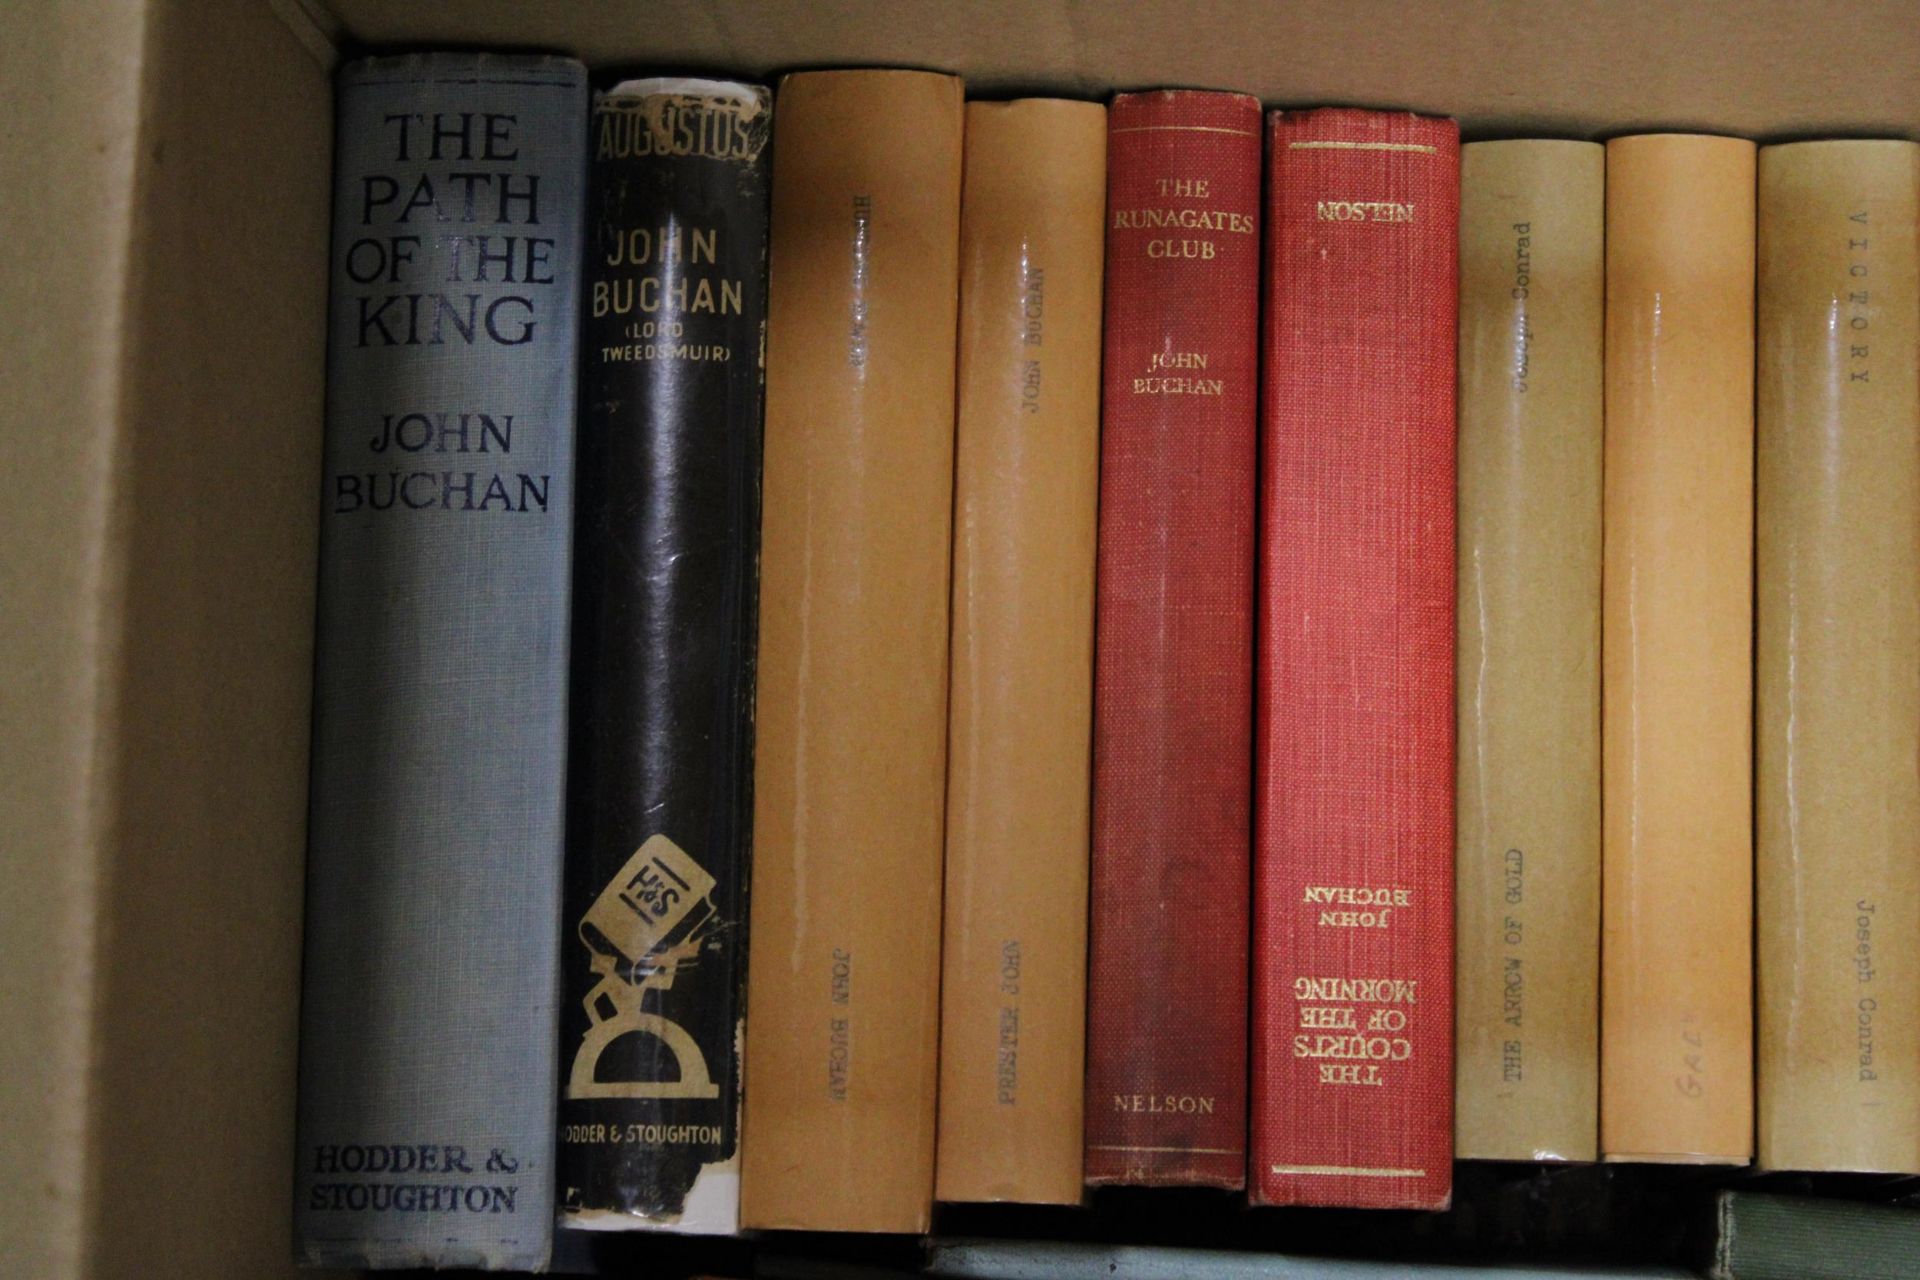 VARIOUS BOOKS TO INCLUDE THE COURTS OF THE MORNING, PRESTER JOHN, THE RUNAGATES CLUB ETC - Image 2 of 4